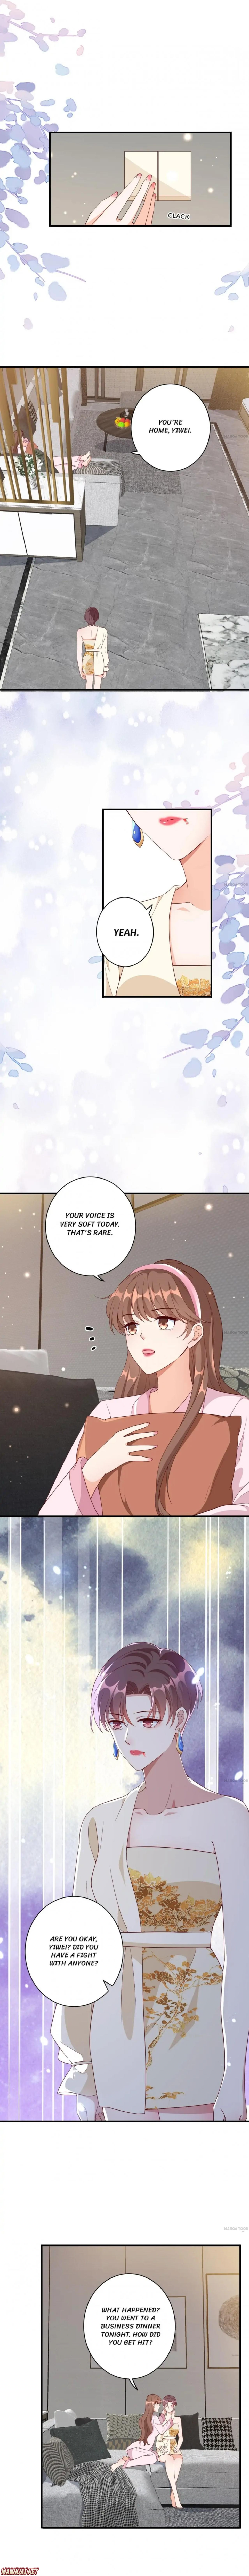 Breakup Loading 99% Chapter 41 - Page 0